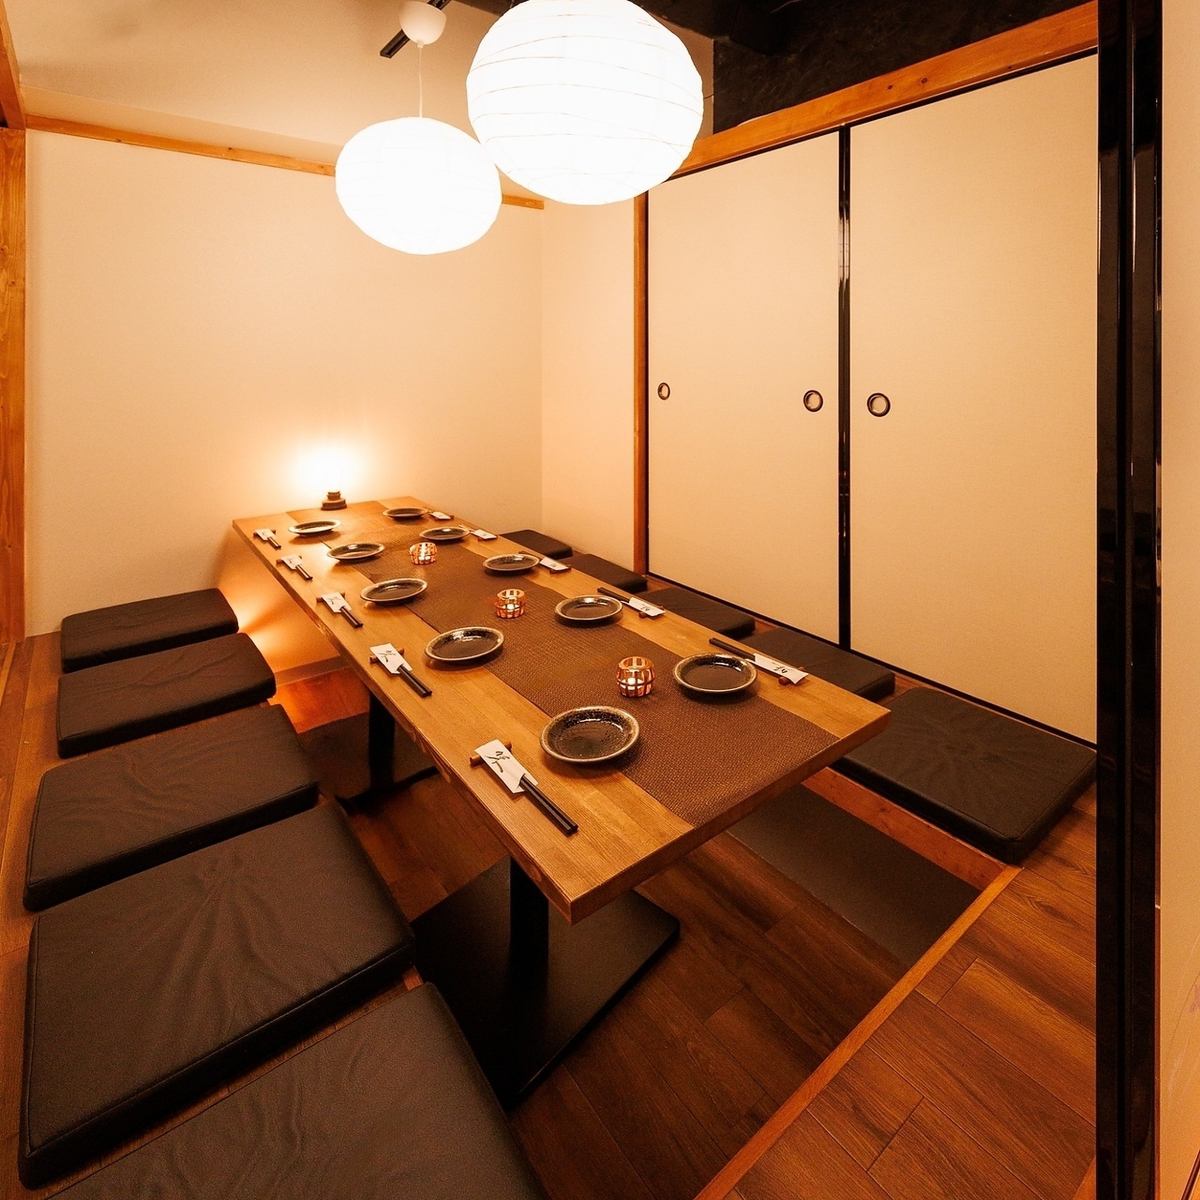 3 minutes walk from Kinshicho Station! All-you-can-drink course starts from 3,280 yen!